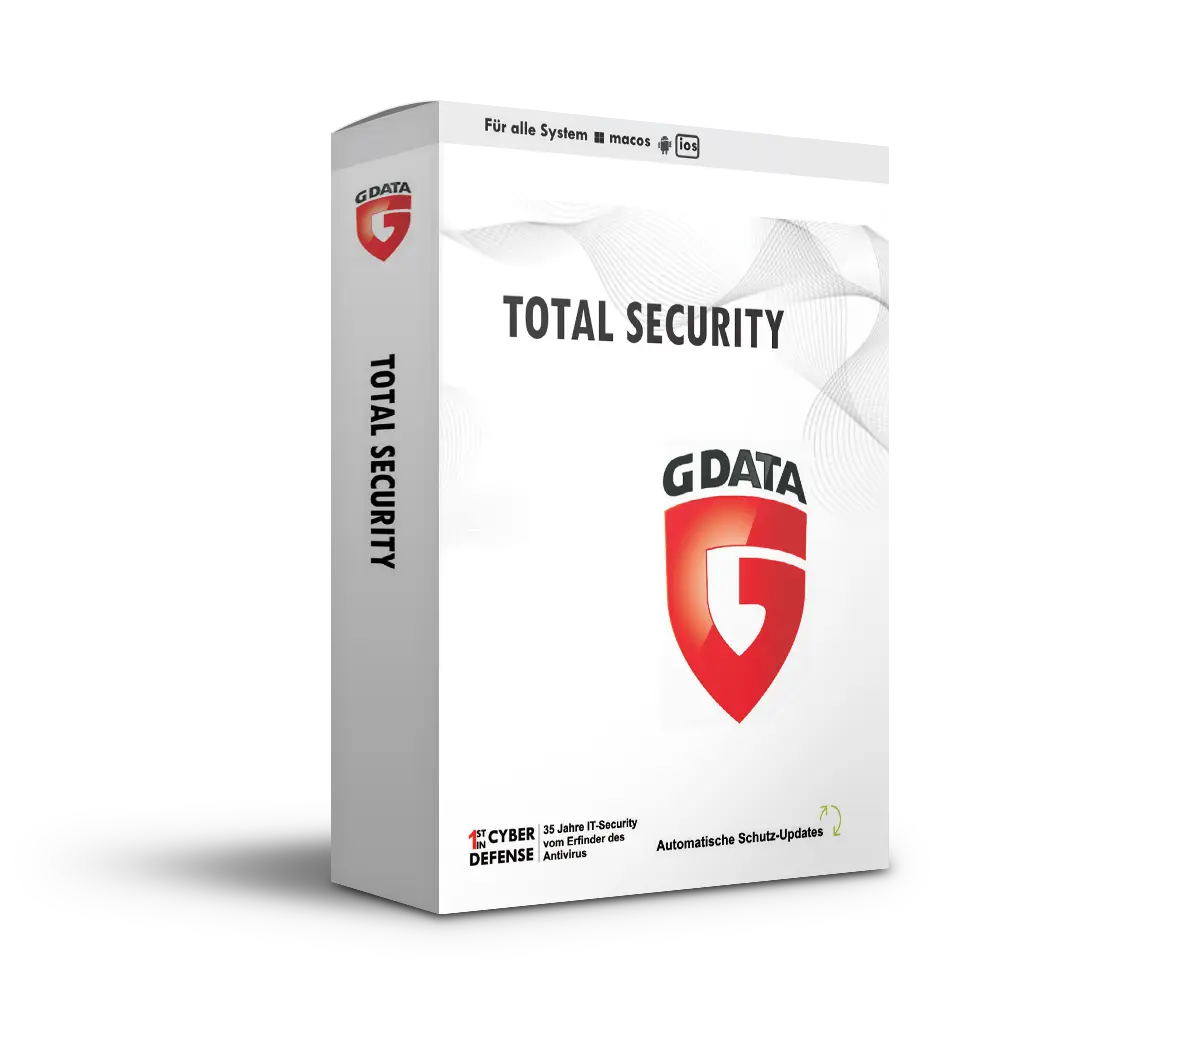 GData Total Security